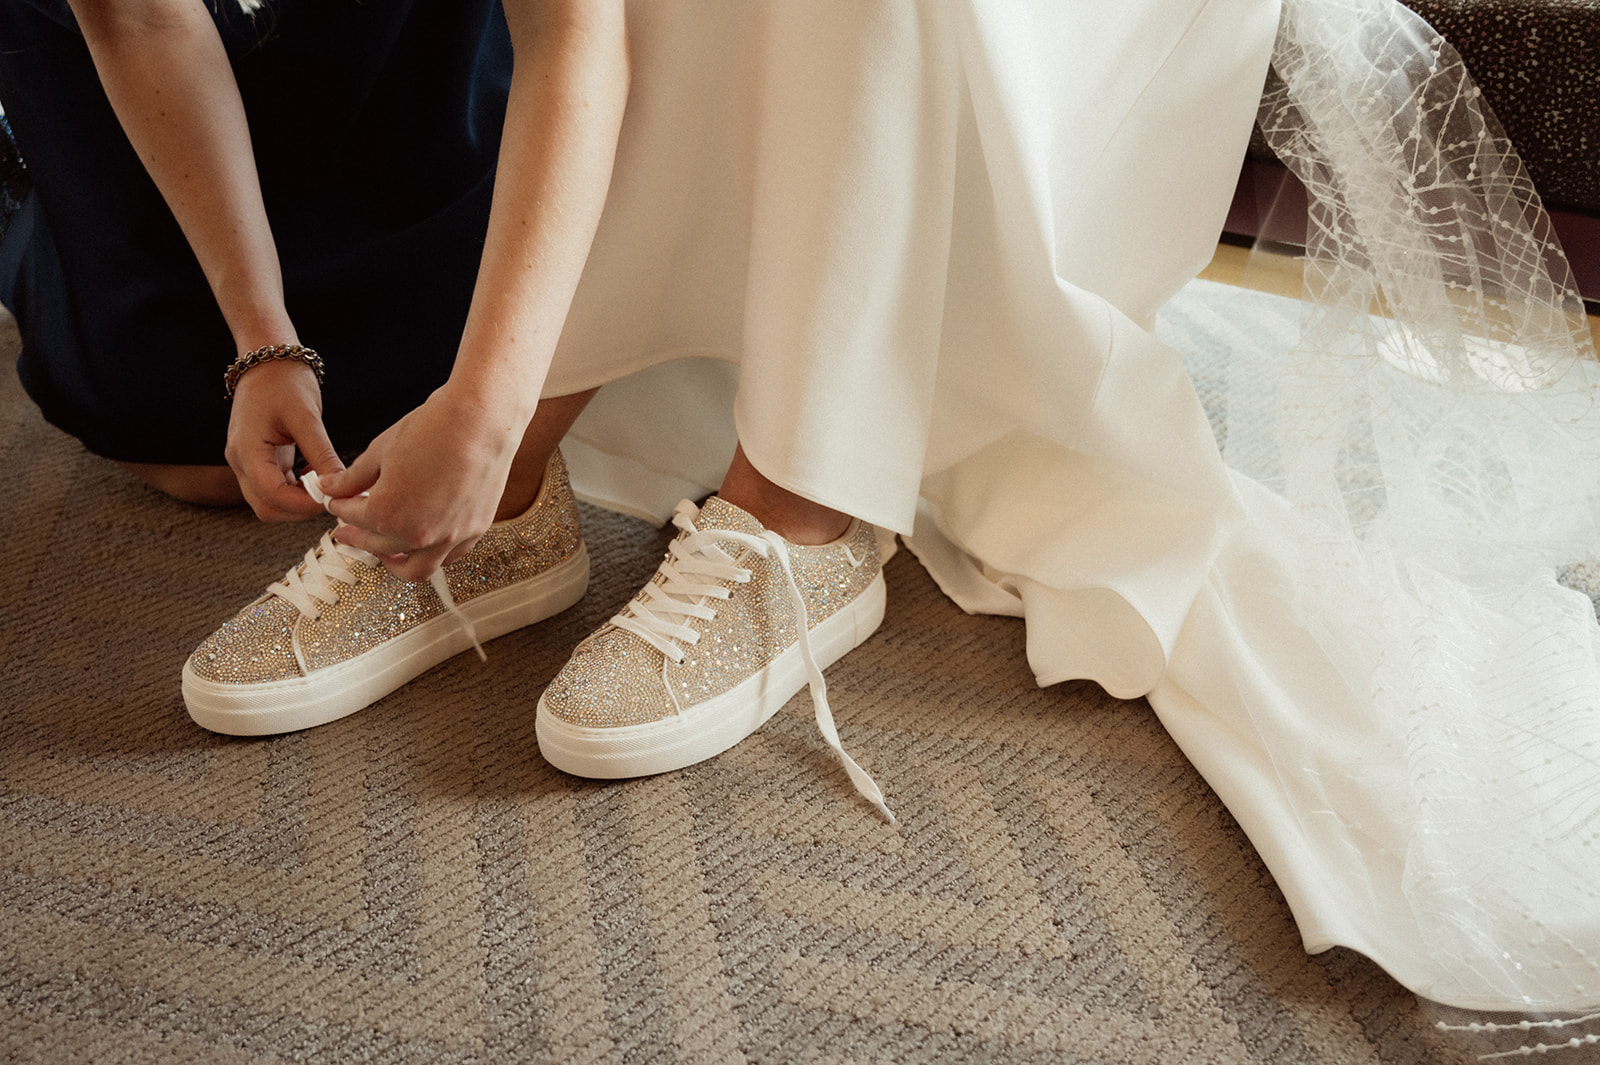 Bride getting her Sparkly Tennis Shoes Tied while Getting Ready 